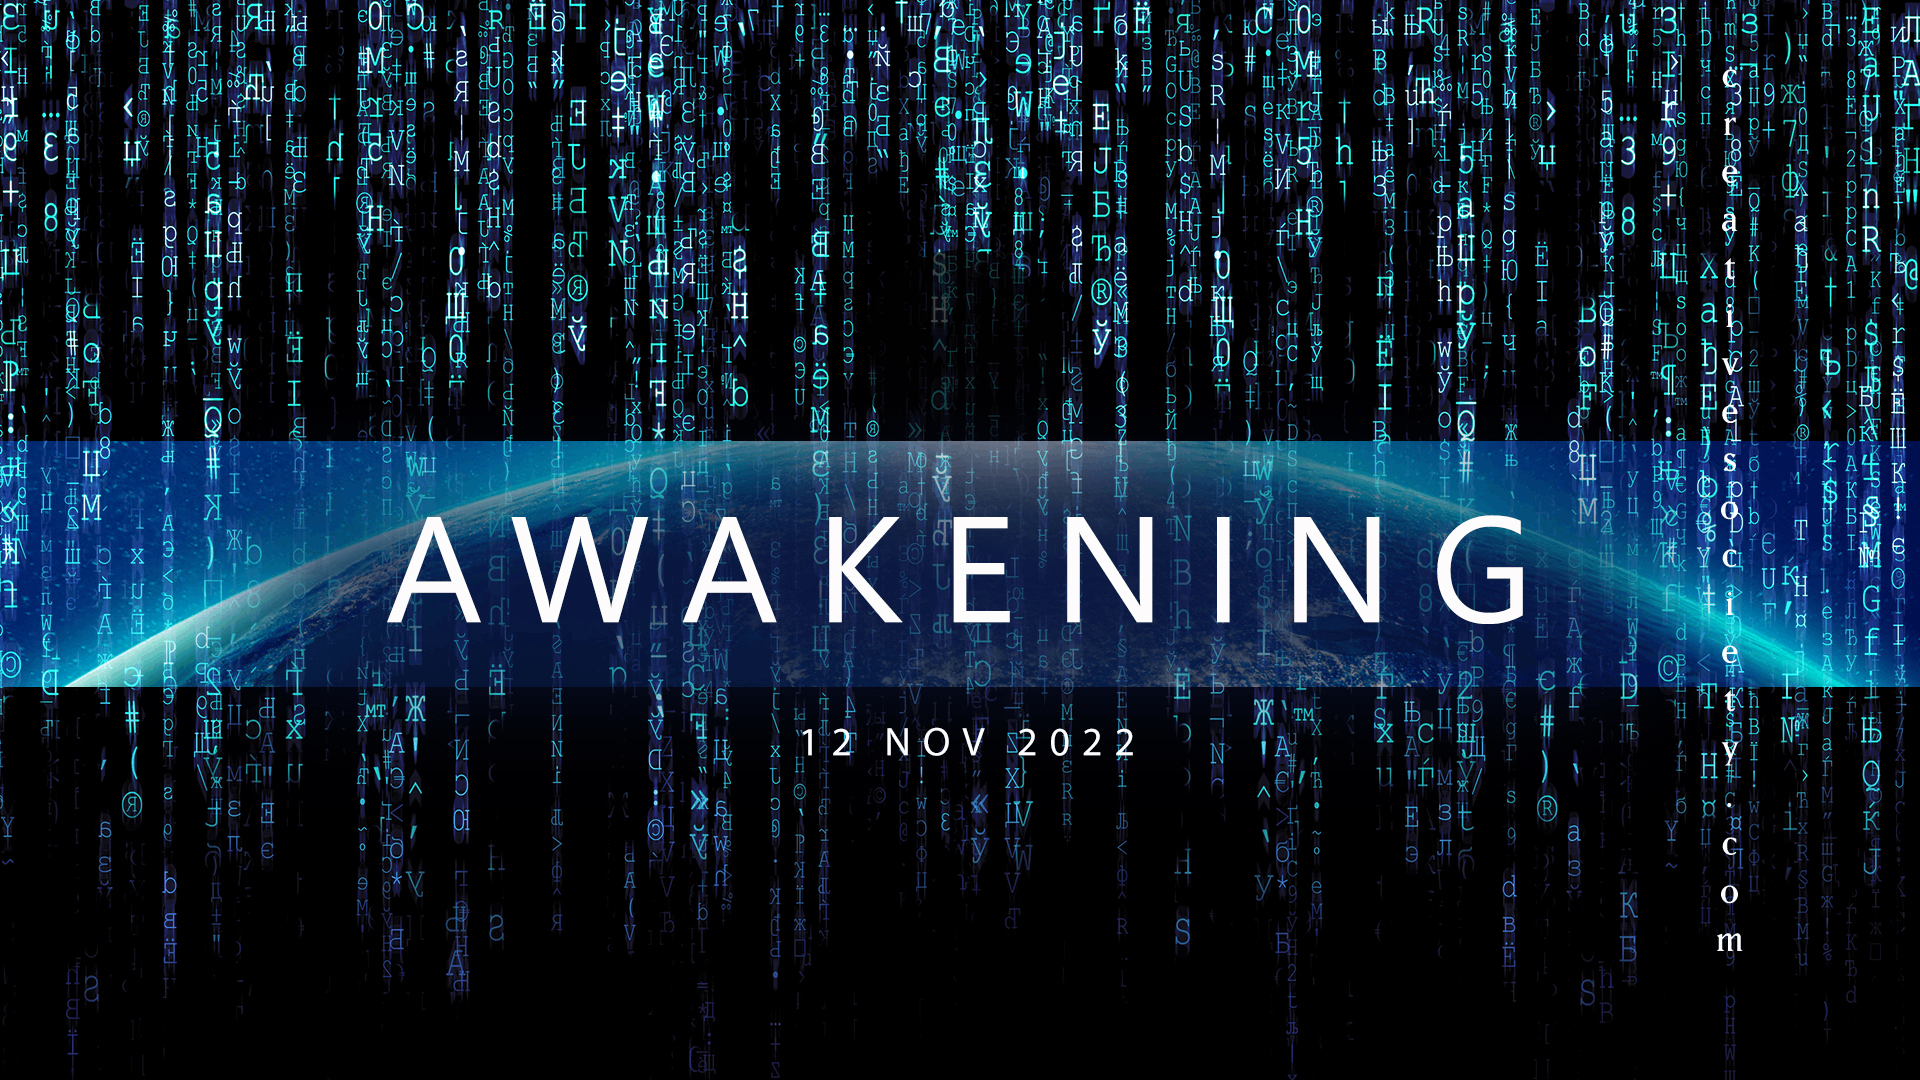 Are You Ready for a New Reality? November 12, 2022